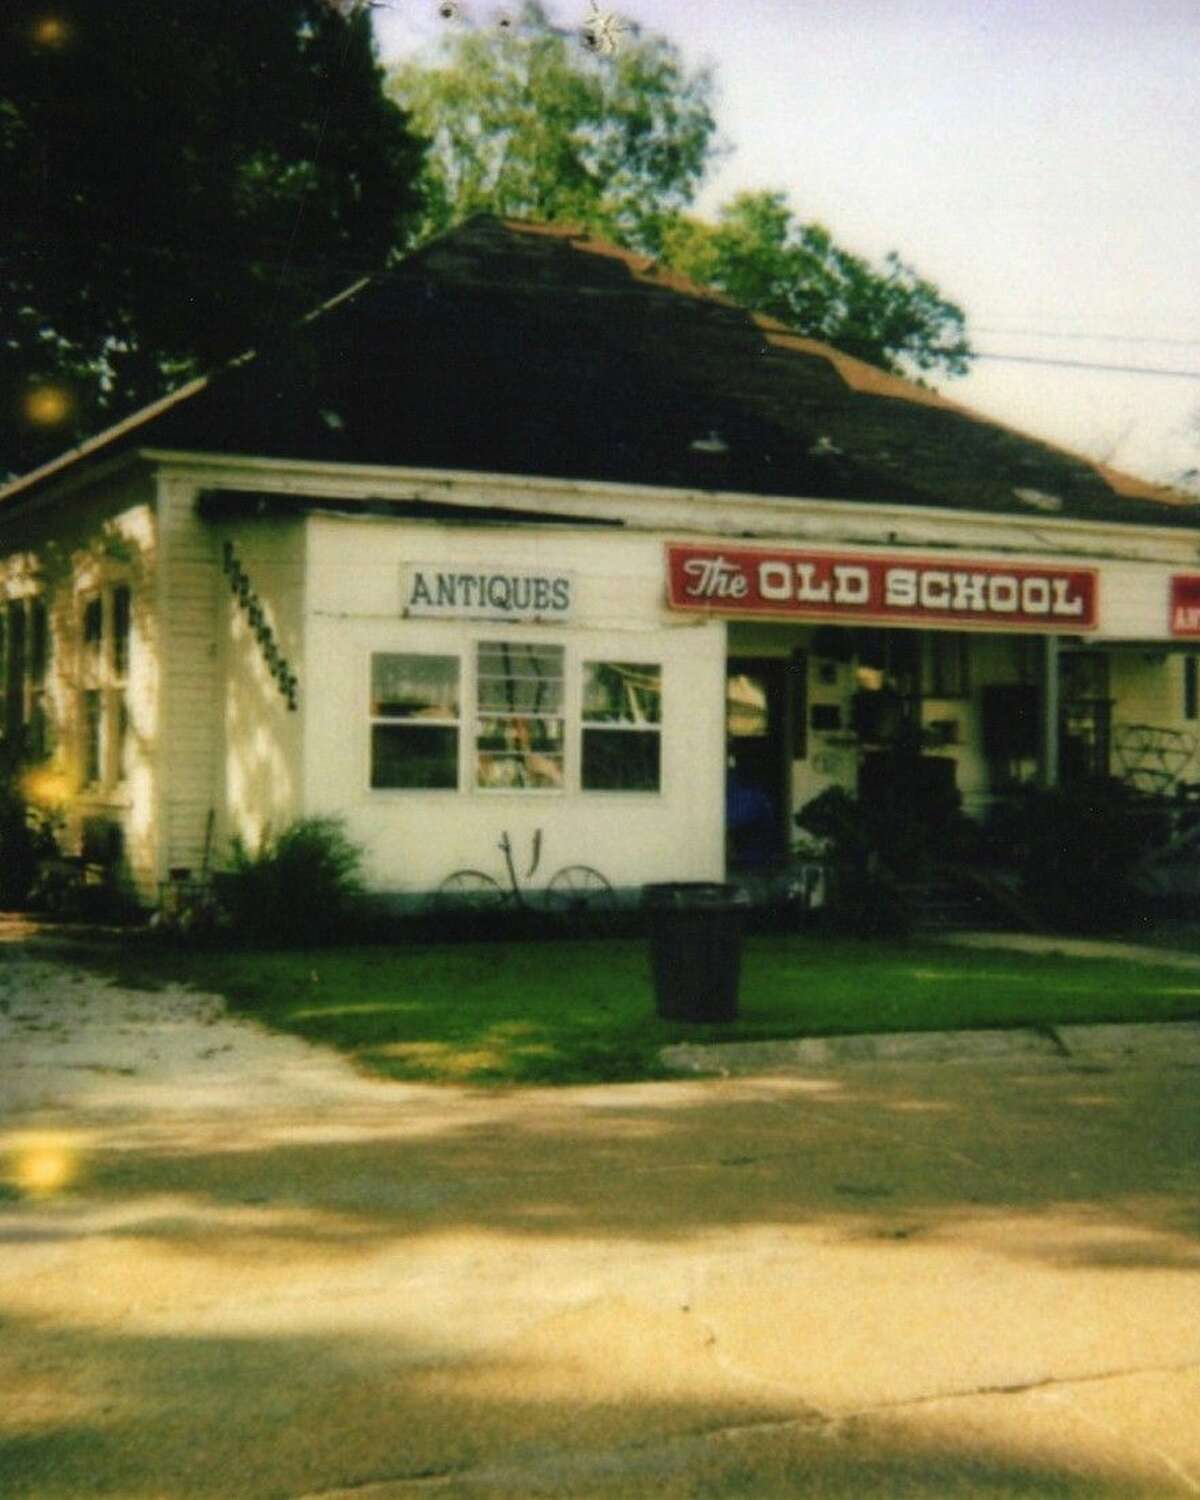 The Dayton Old School was rented for several years by Norbet and Ann Westmoreland and turned into an antique/curiosity shop.